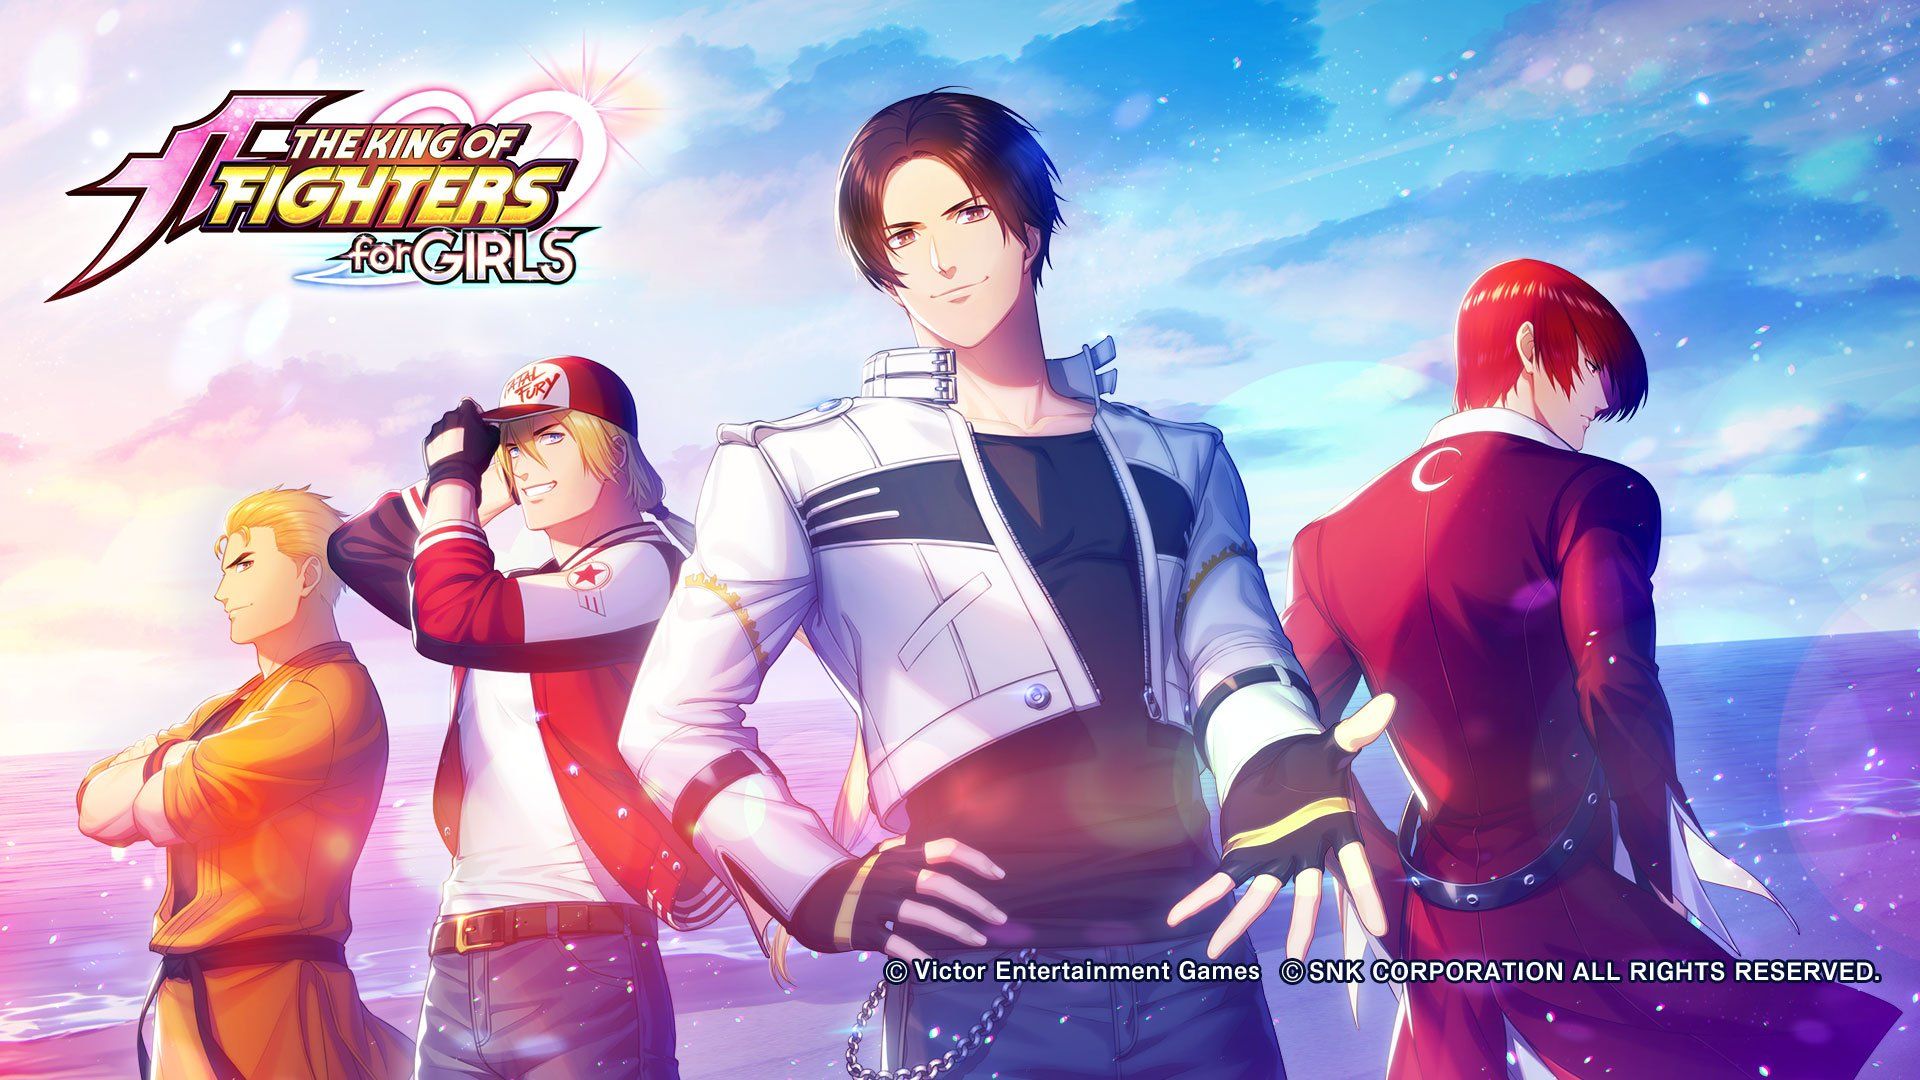 THE KING OF FIGHTERS for GIRLS Announced for Japan